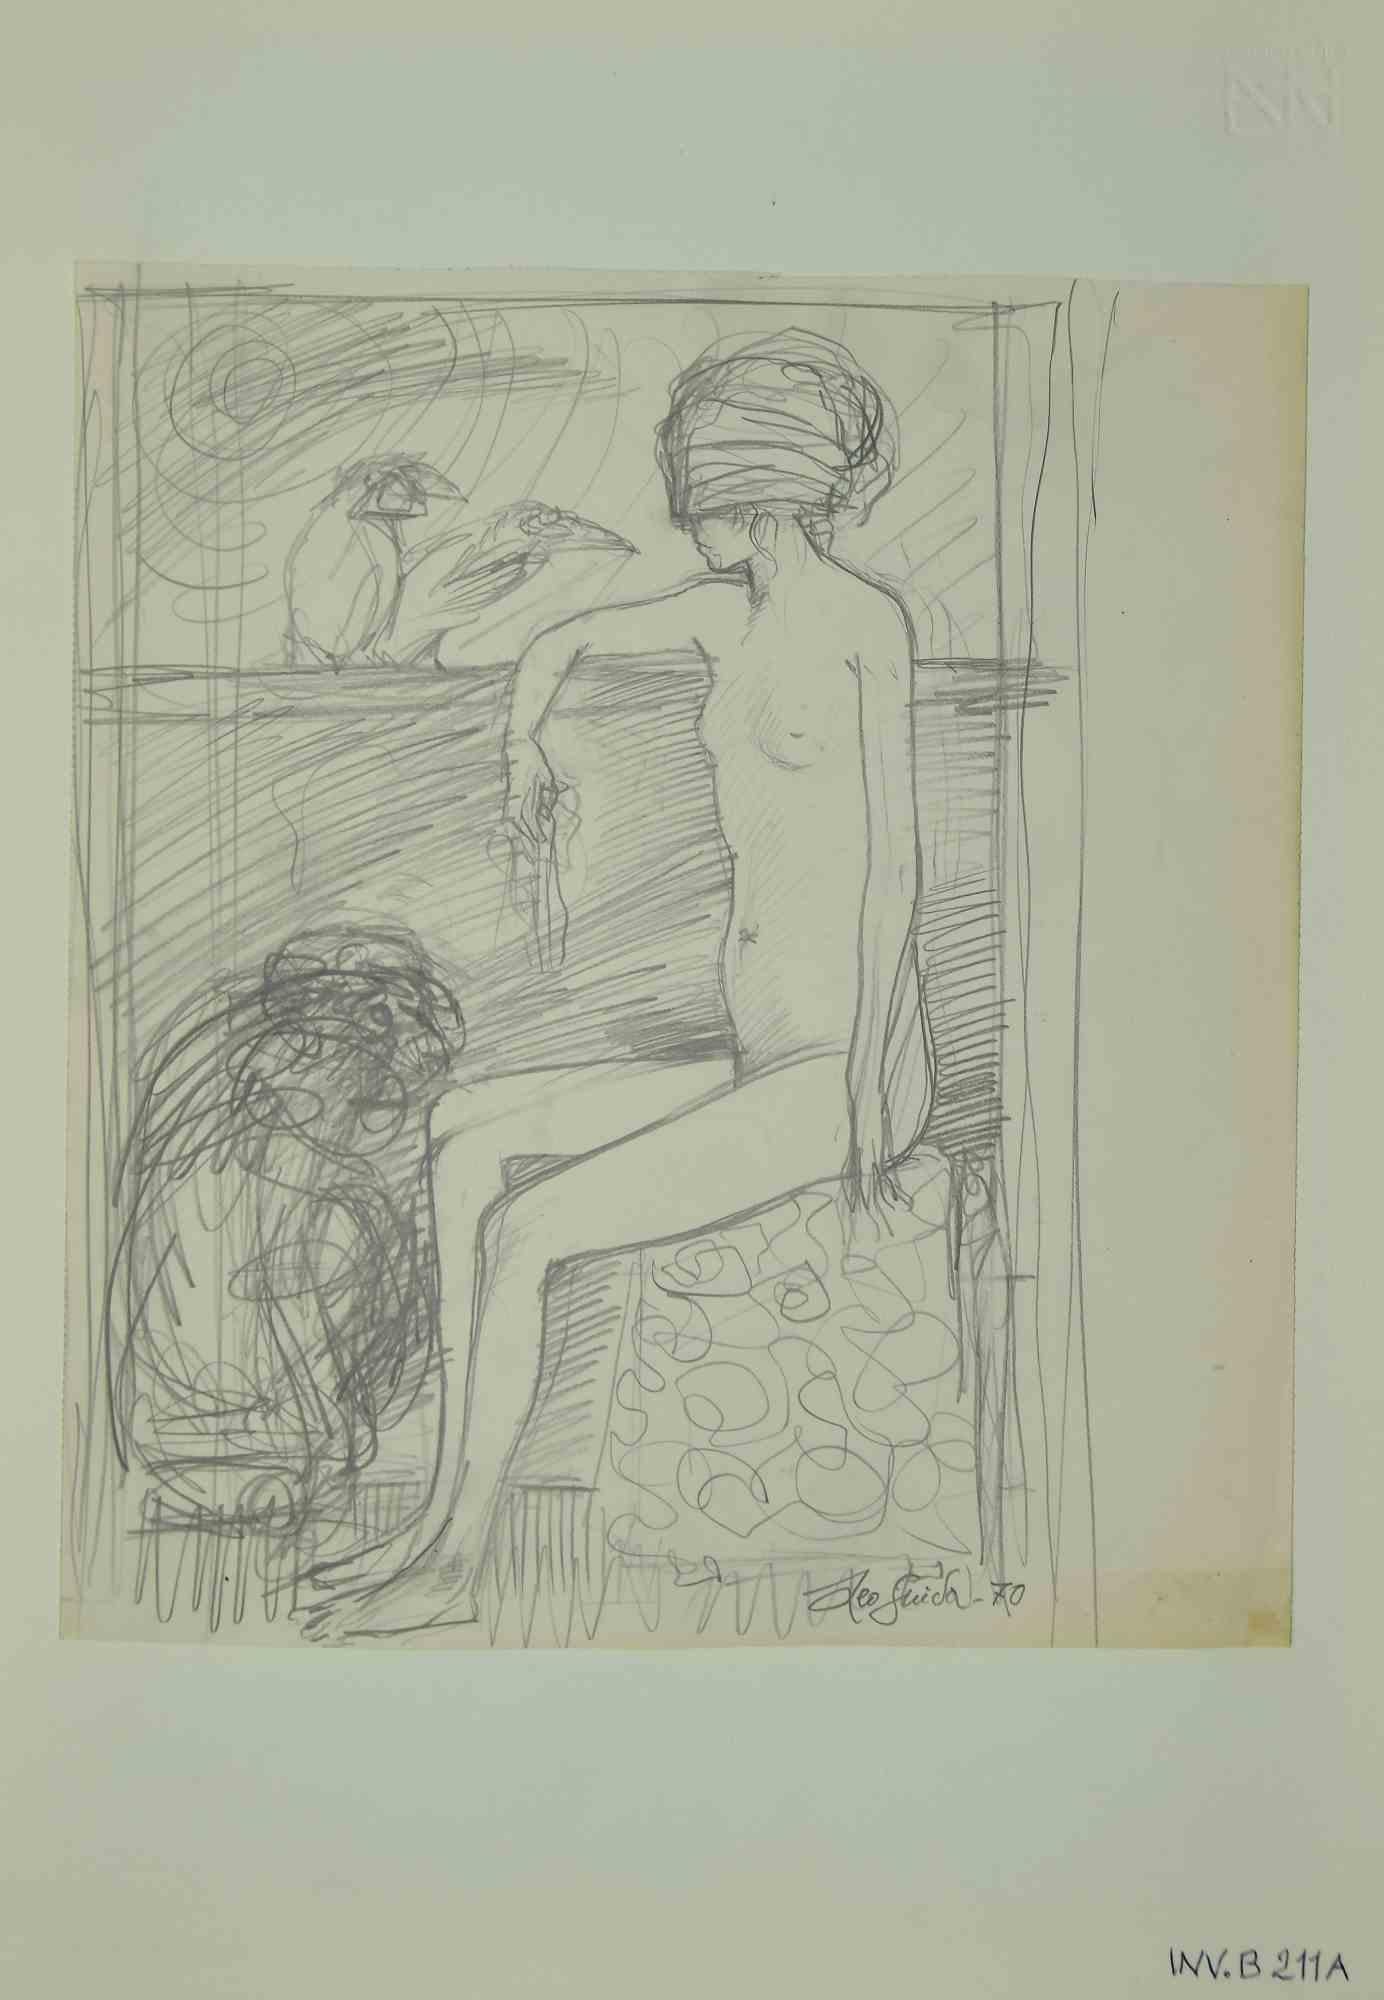 Nude is an original artwork realized  in 1970 by the italian Contemporary artist  Leo Guida  (1992 - 2017).

Original pencil drawing on ivory-colored paper, glued on cardboard (50 x 35 cm).

Hand-signed and dated on the lower margins. 

Excellent